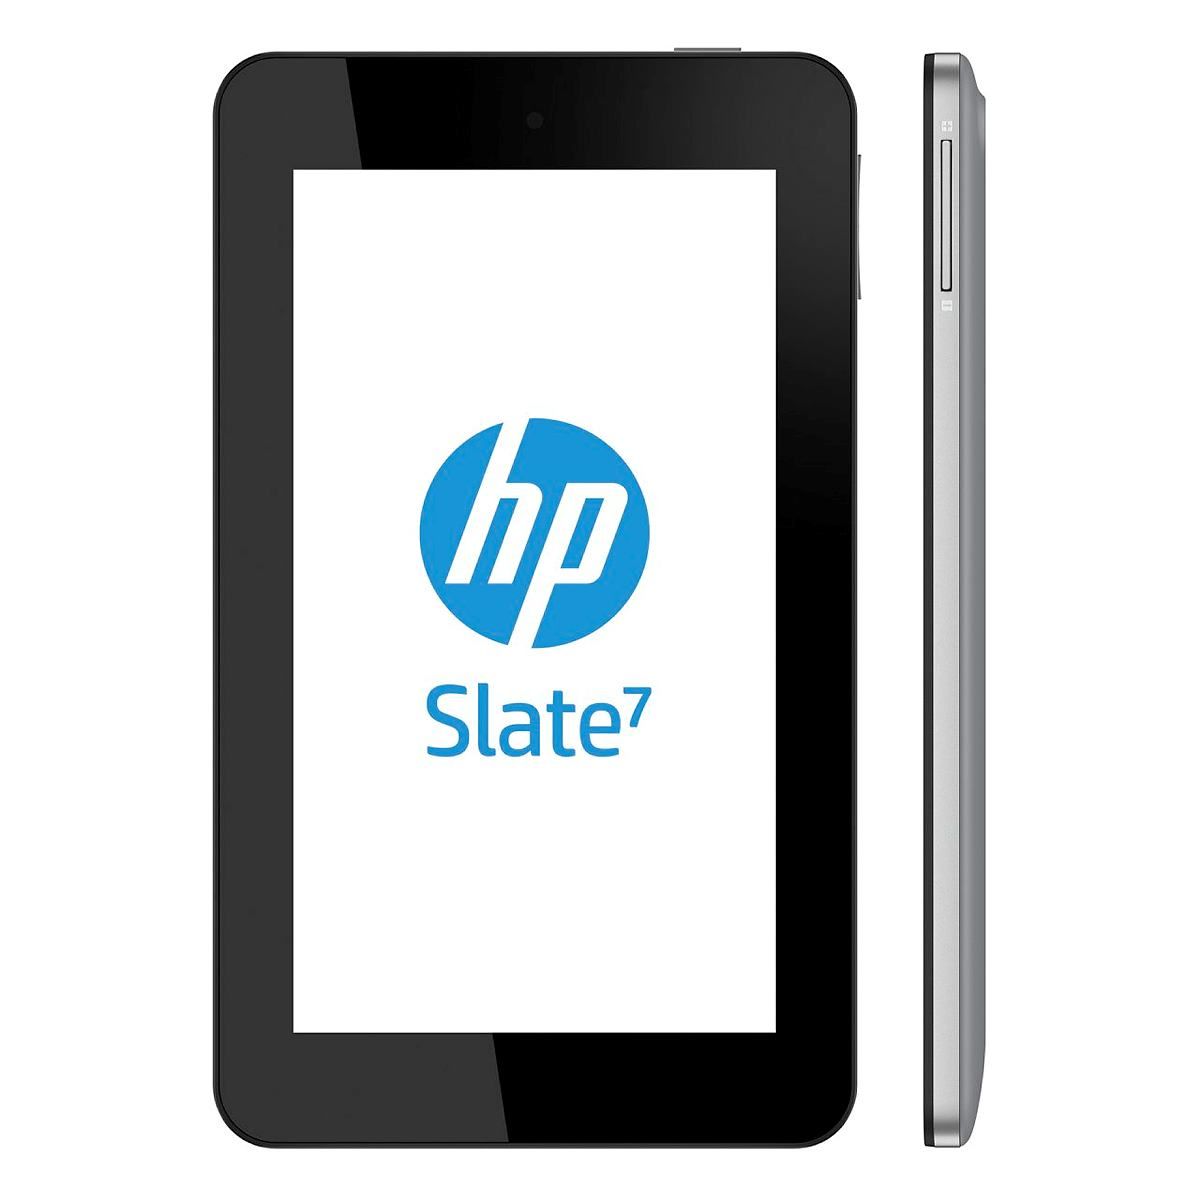 HP Slate 7 front